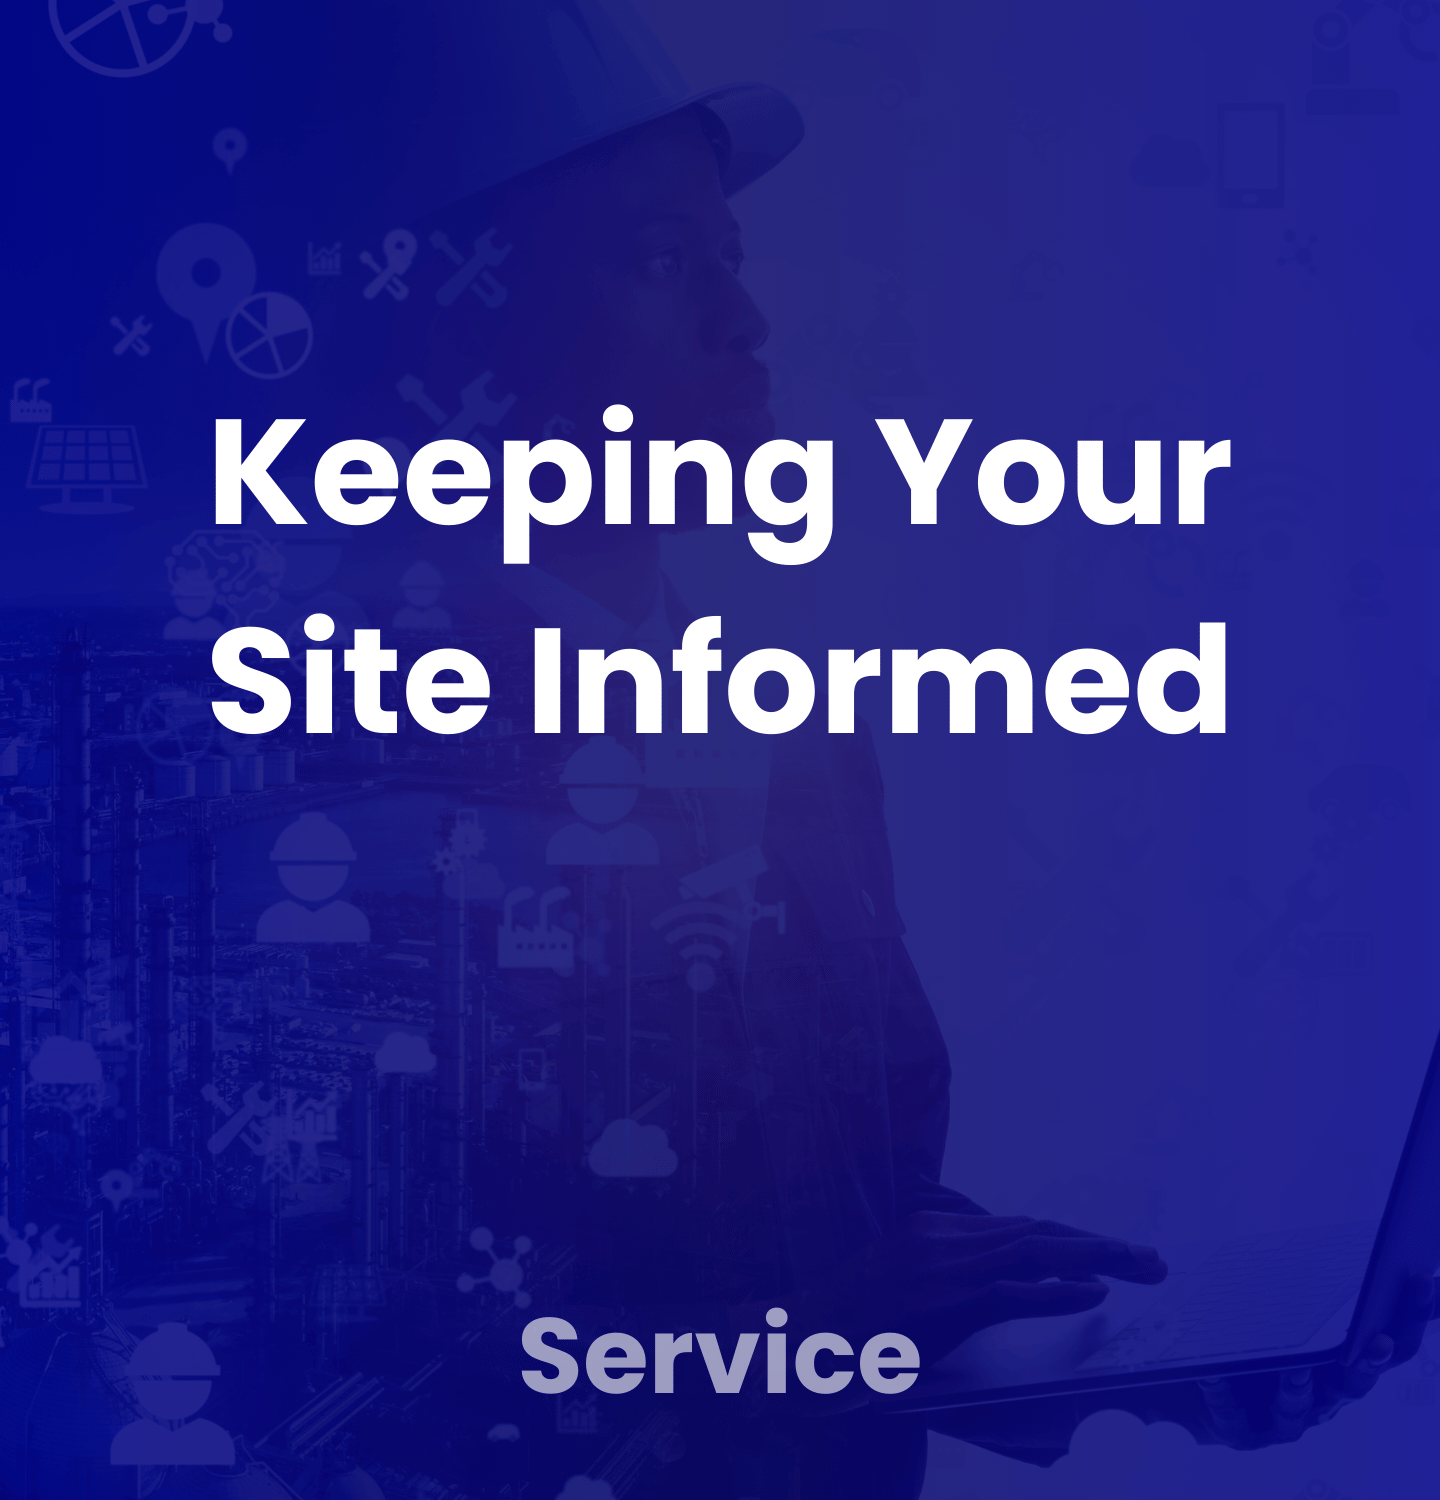 Keeping your site informed